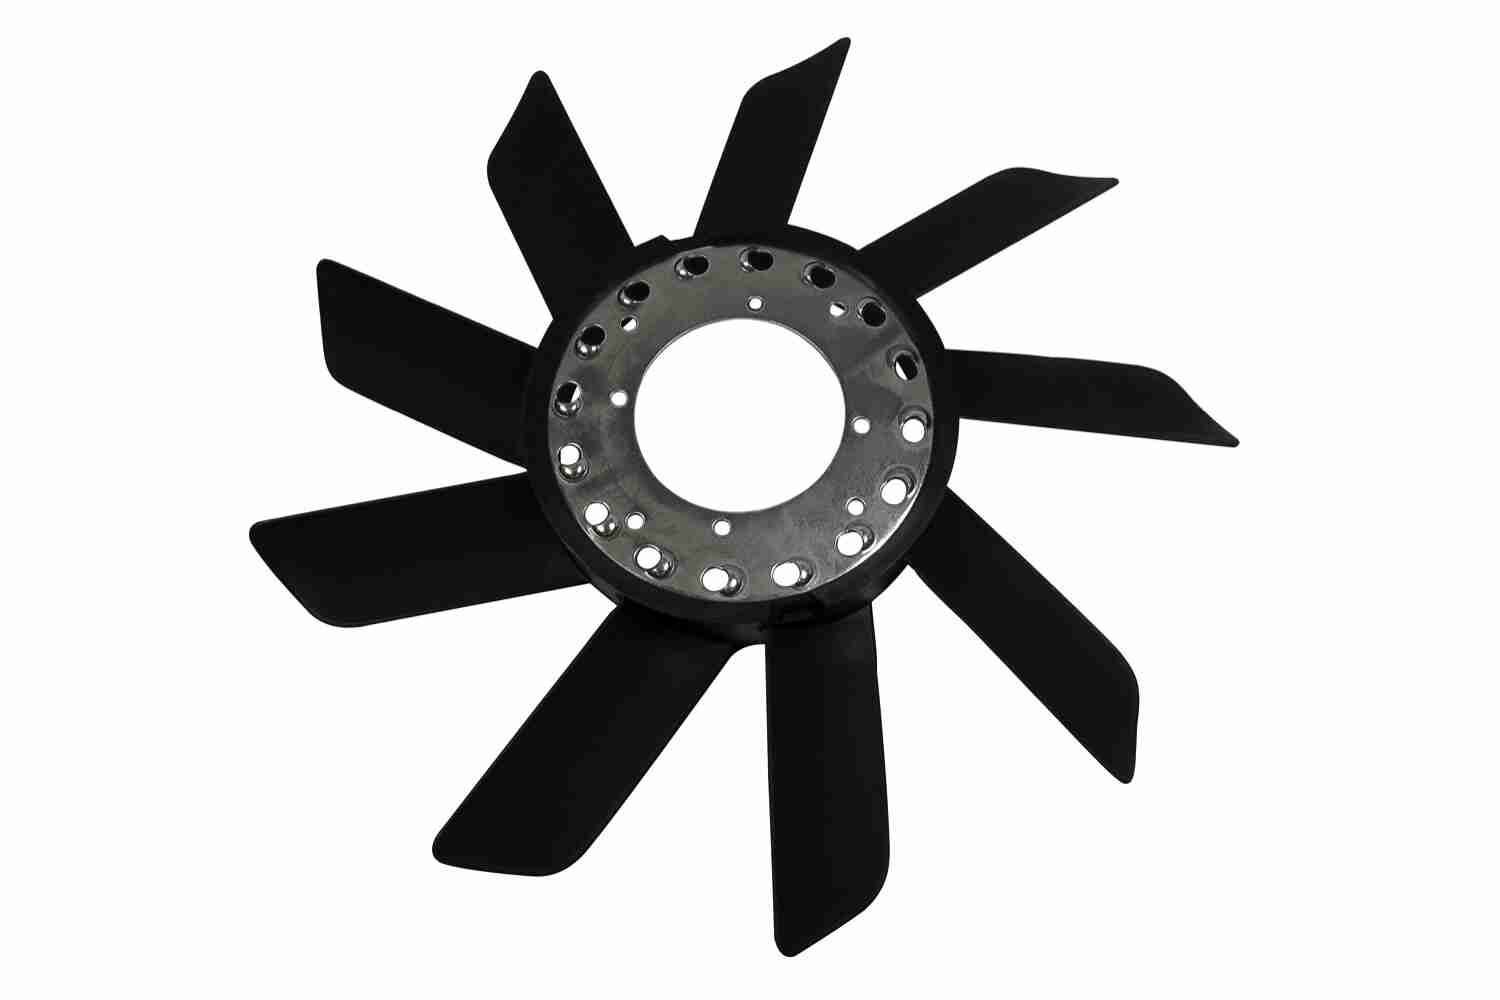 Original V20-90-1101 VEMO Fan wheel, engine cooling experience and price